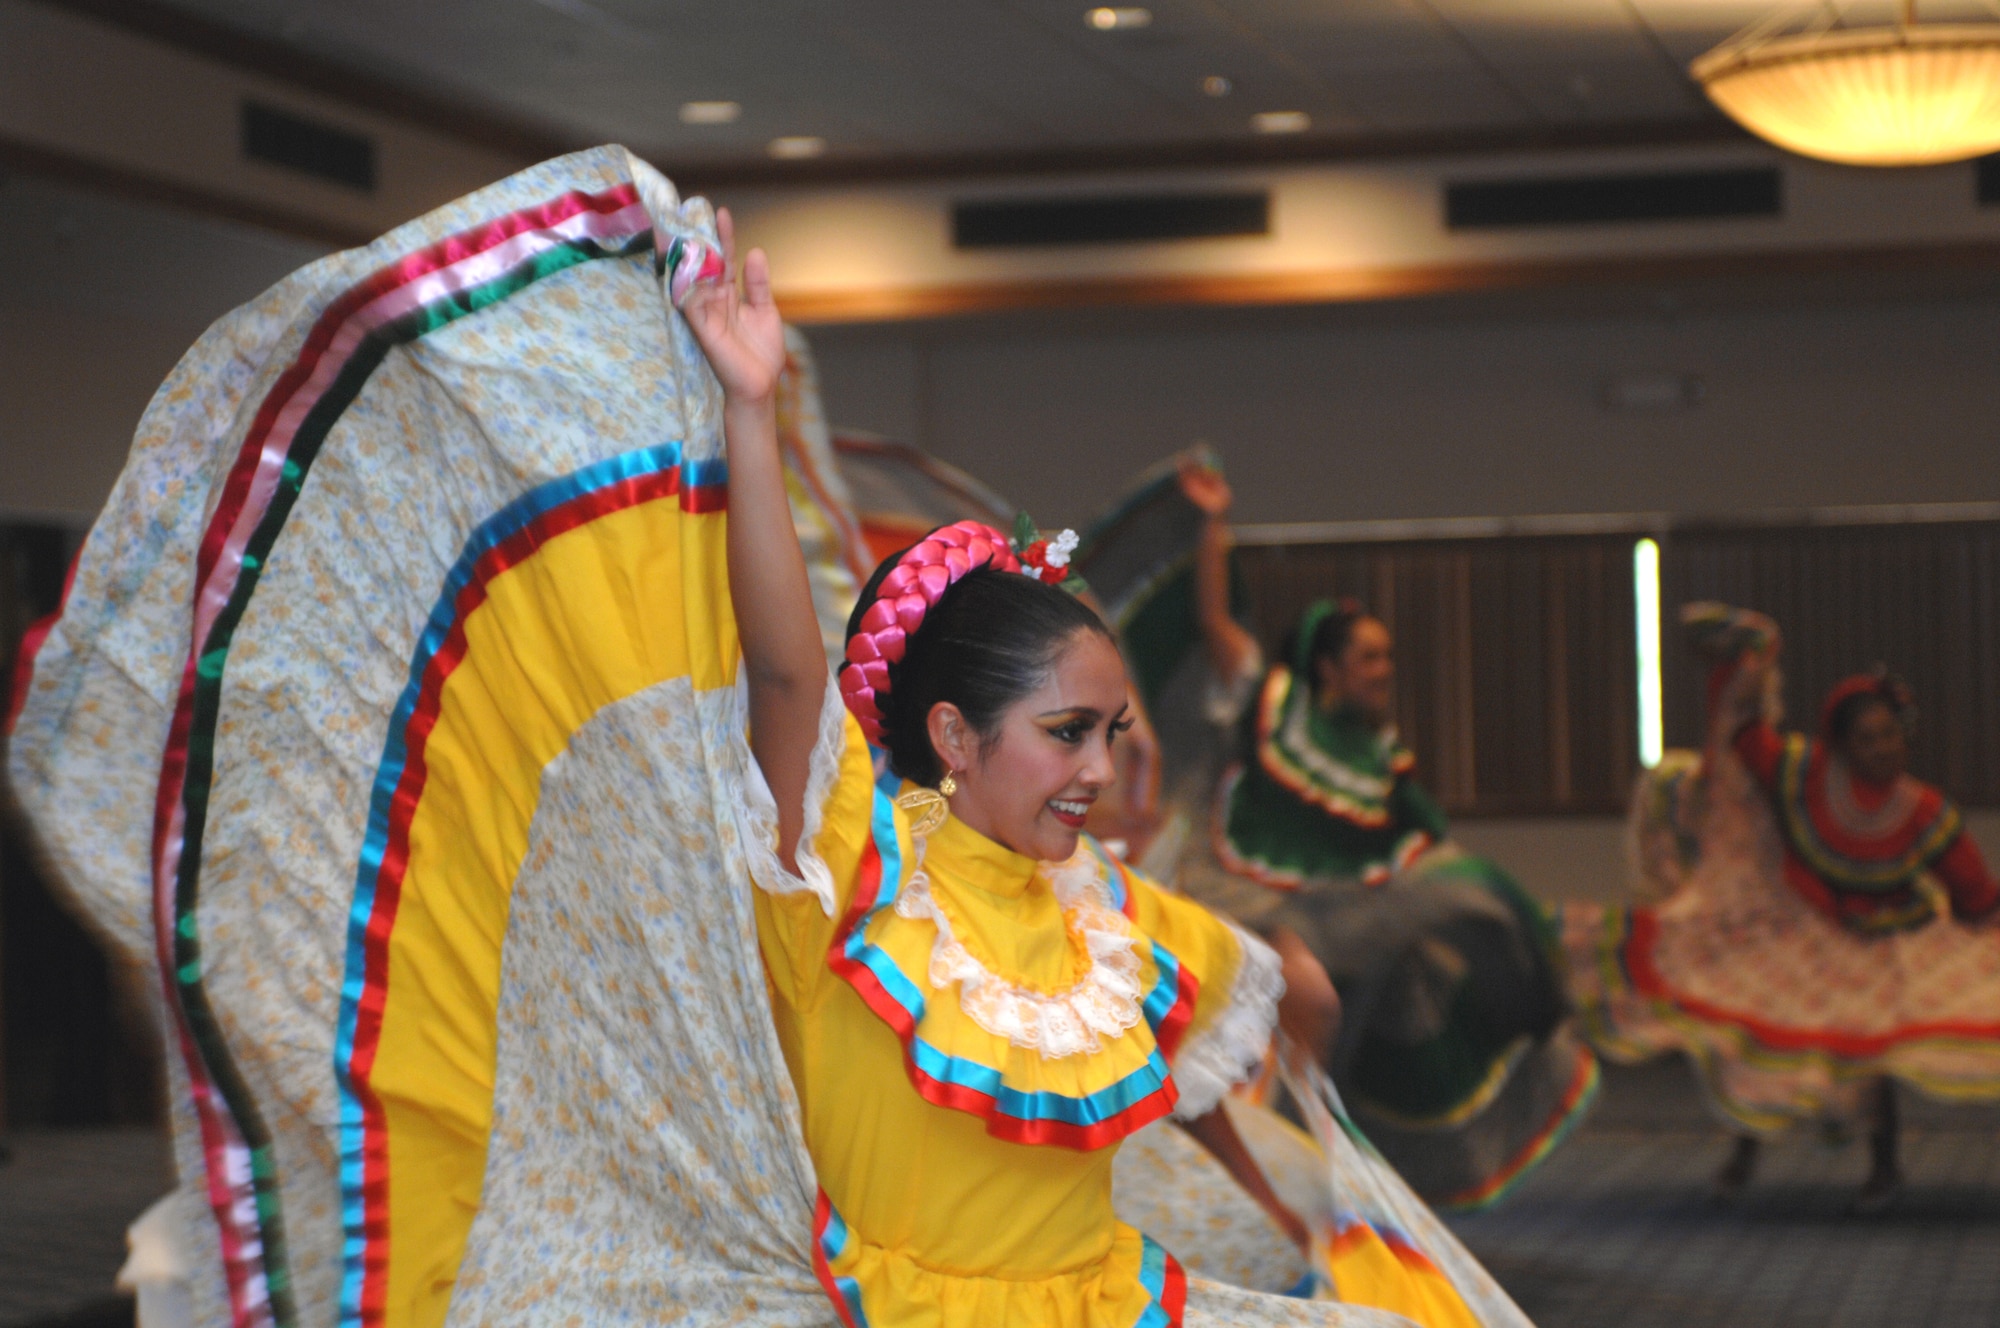 Ballet Folklorico Quetzales dancers from El Paso, Texas, perform a dance routine for the Hispanic Heritage Luncheon at the enlisted club, at Holloman Air Force Base, N.M., September 25. The dresses and style of step dance represent the region of Jalisco, Mexico. (U.S. Air Force photo/Airman 1st Class Veronica Salgado)   